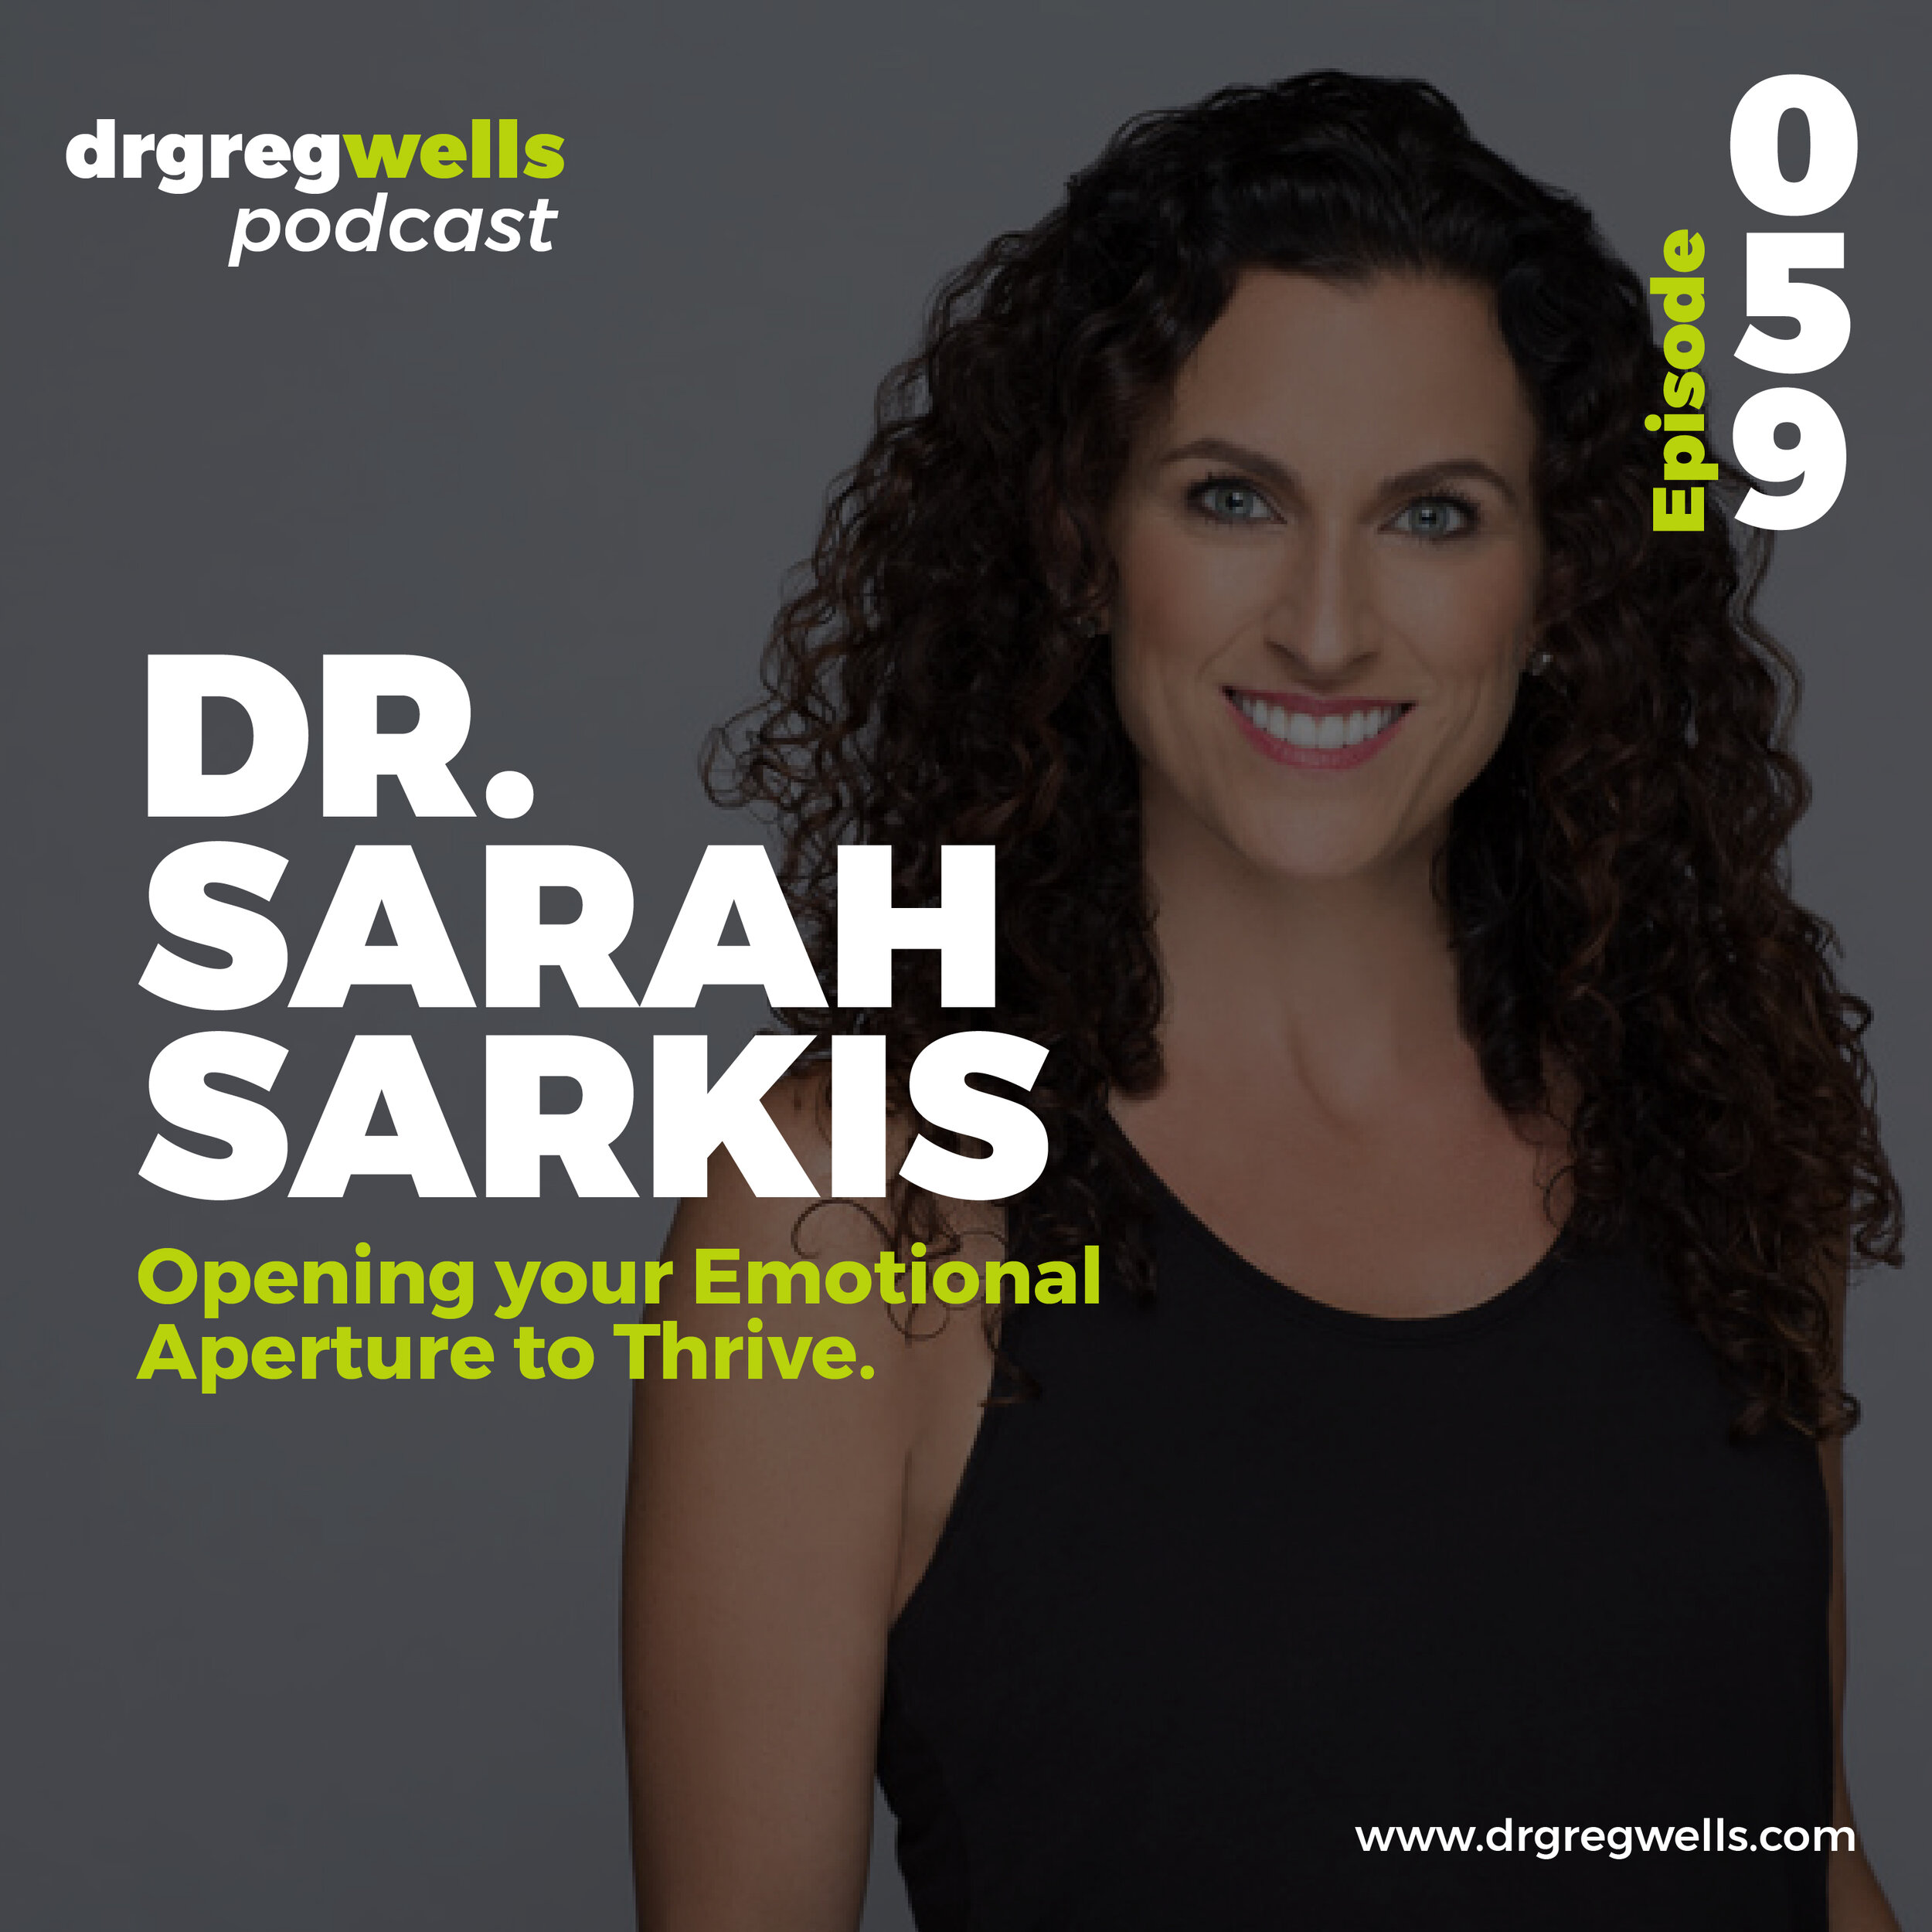 Dr Greg Wells Podcast Guest EP 59-01.jpg